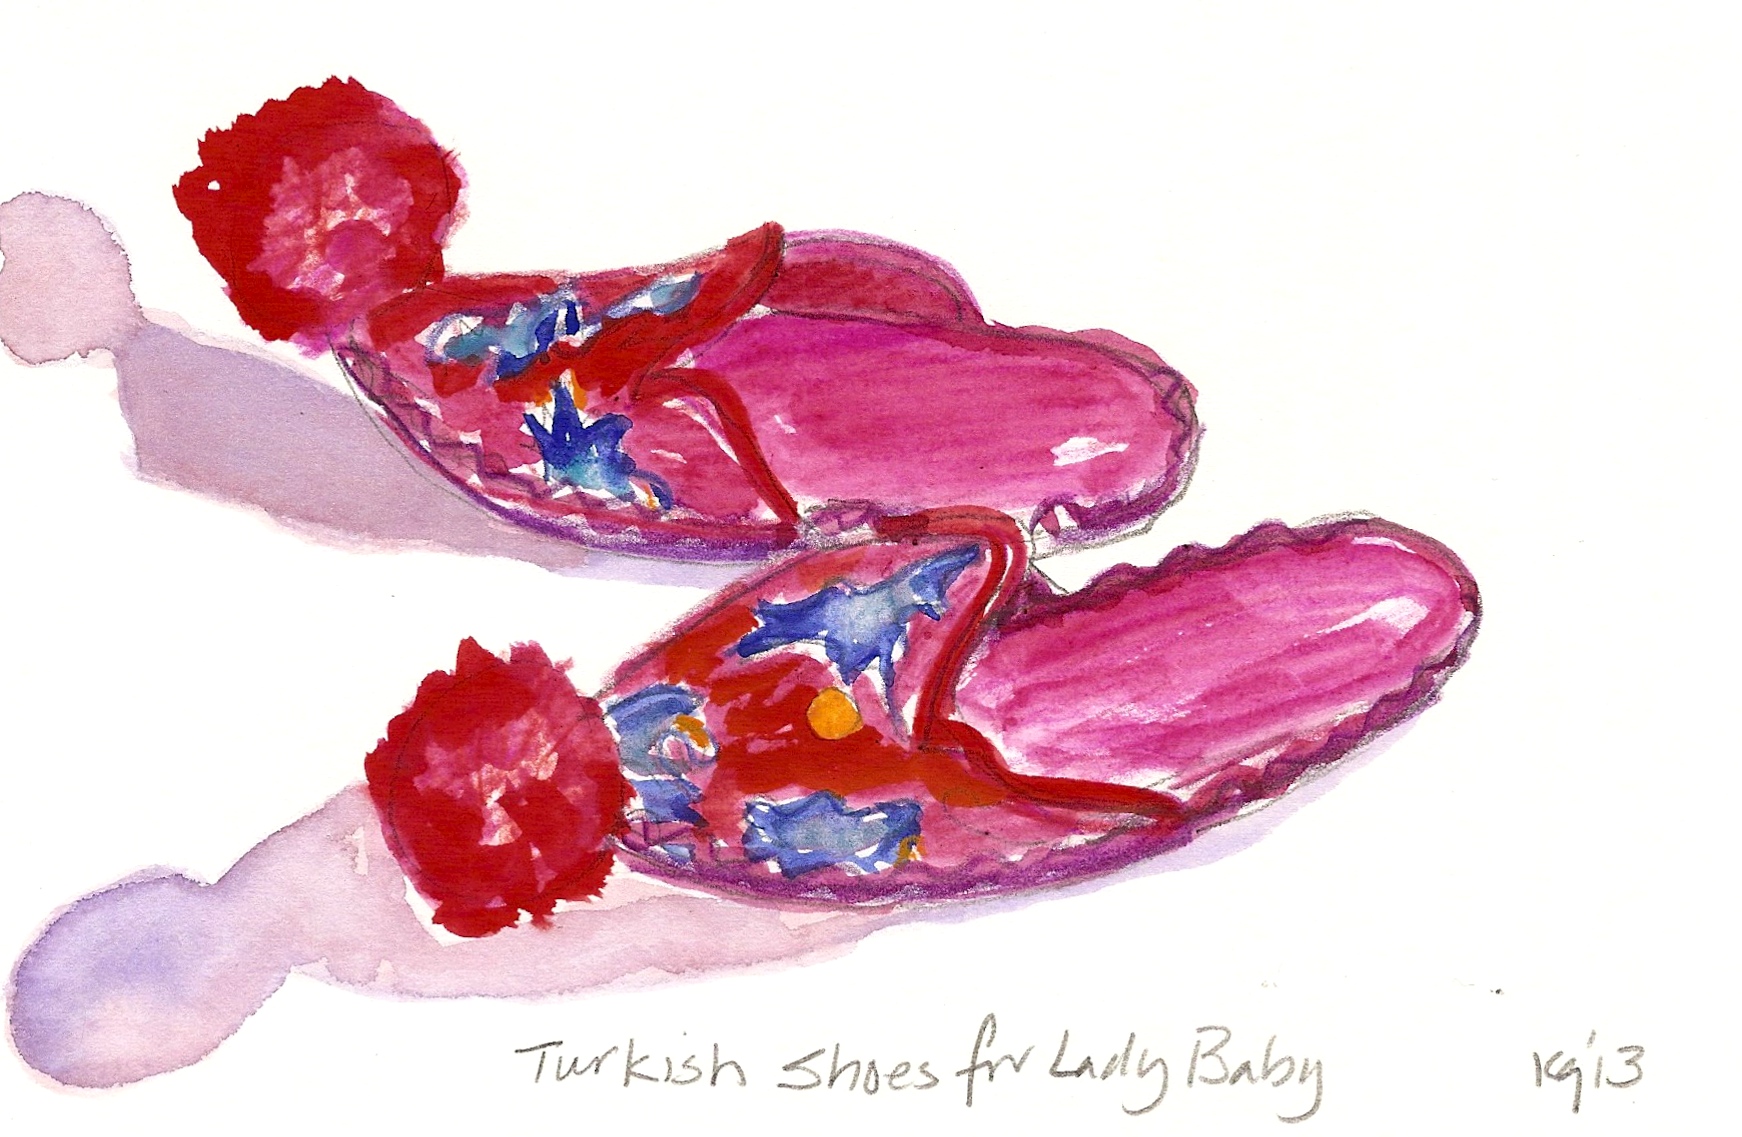 Turkish Shoes for Lady Baby